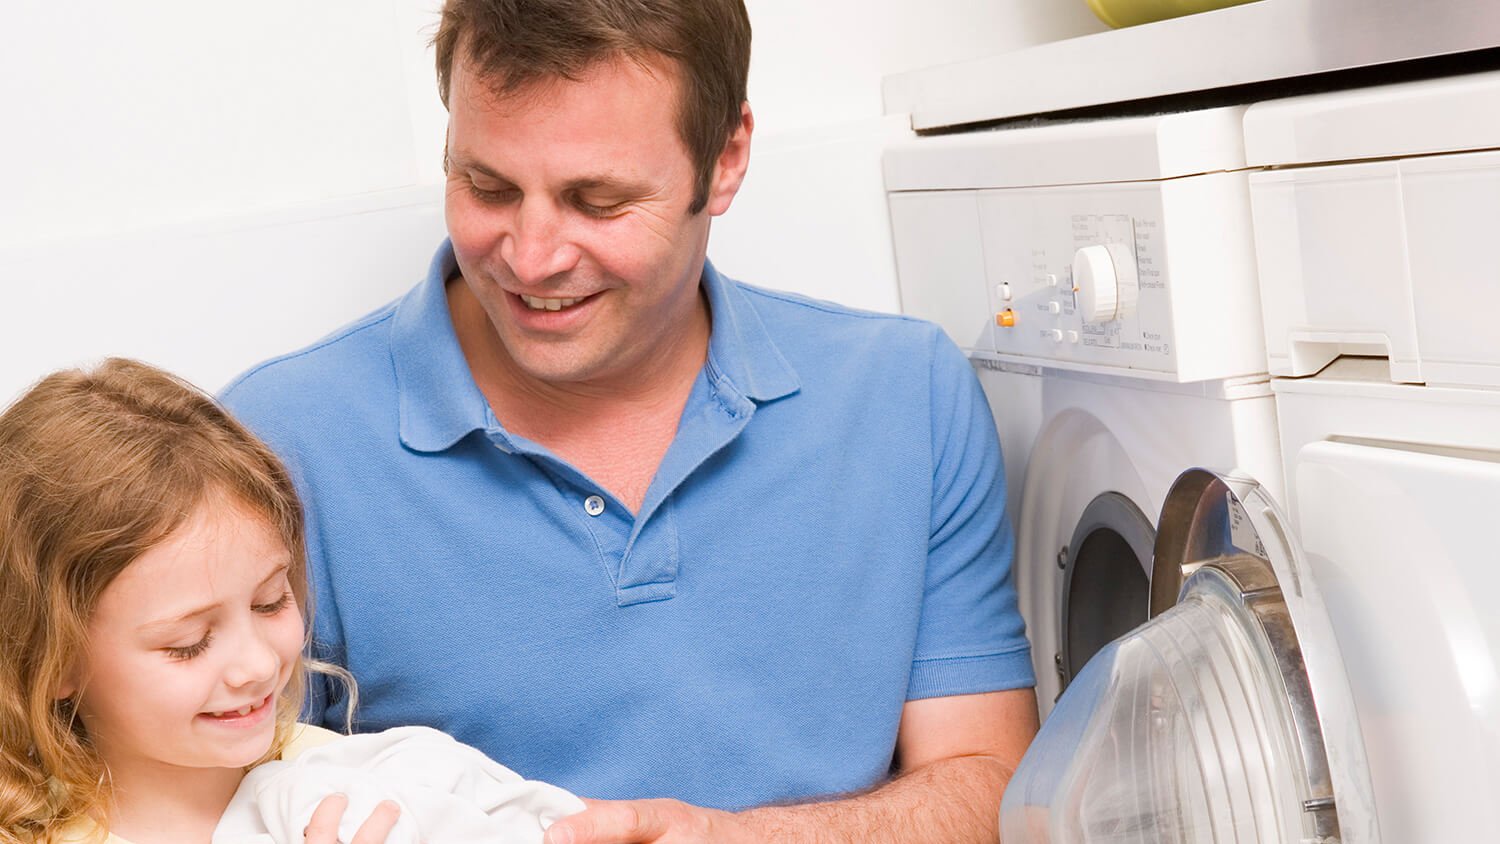 father and daughter doing laundry together